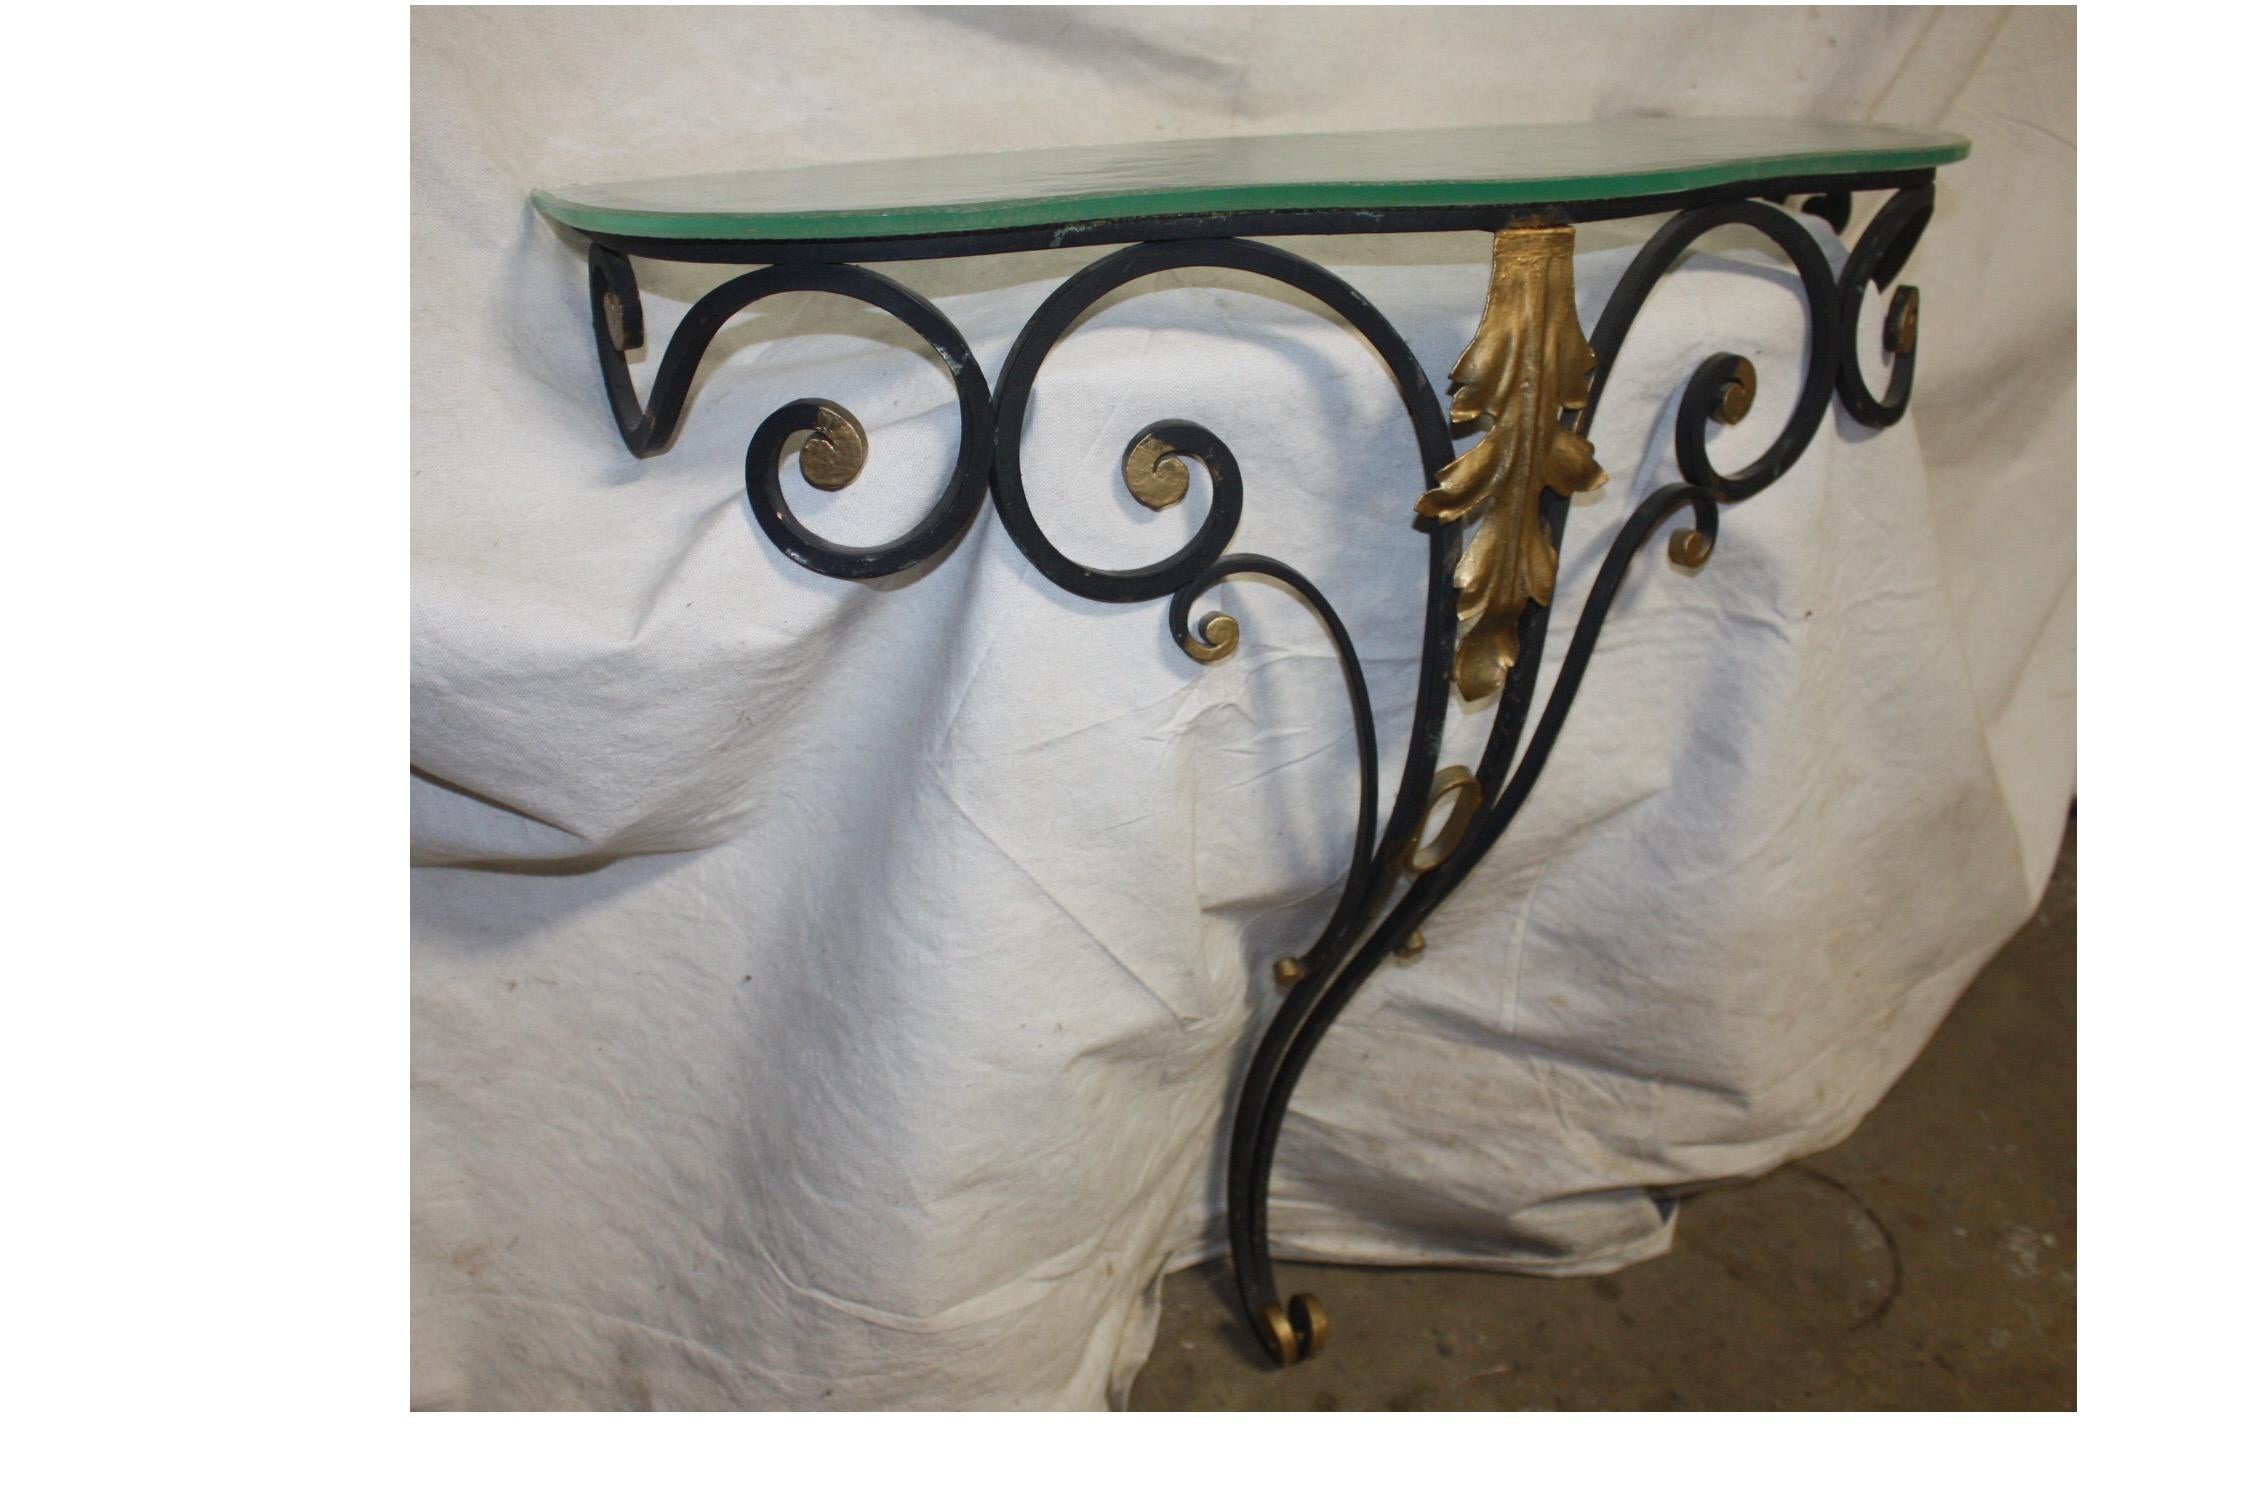 Charming early 20th century iron console.